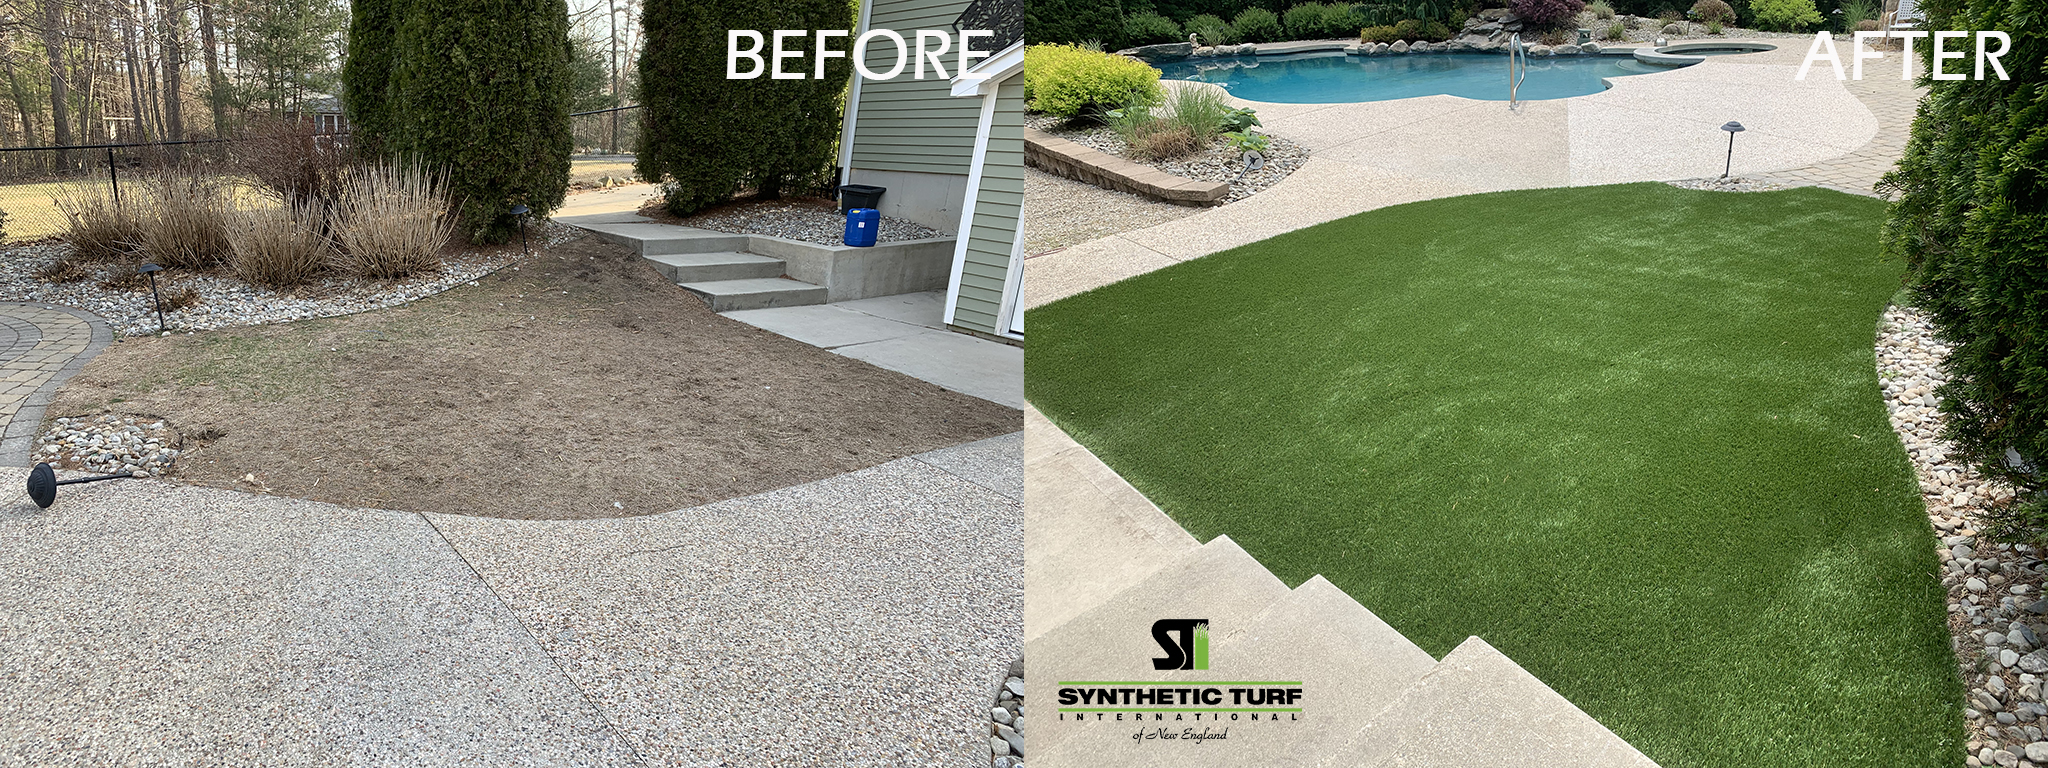 Before and after photos side by side - transformation of a pool area in Massachusetts, with St.Germain's high-quality artificial grass replacing the original surface, creating a lush and inviting outdoor space.